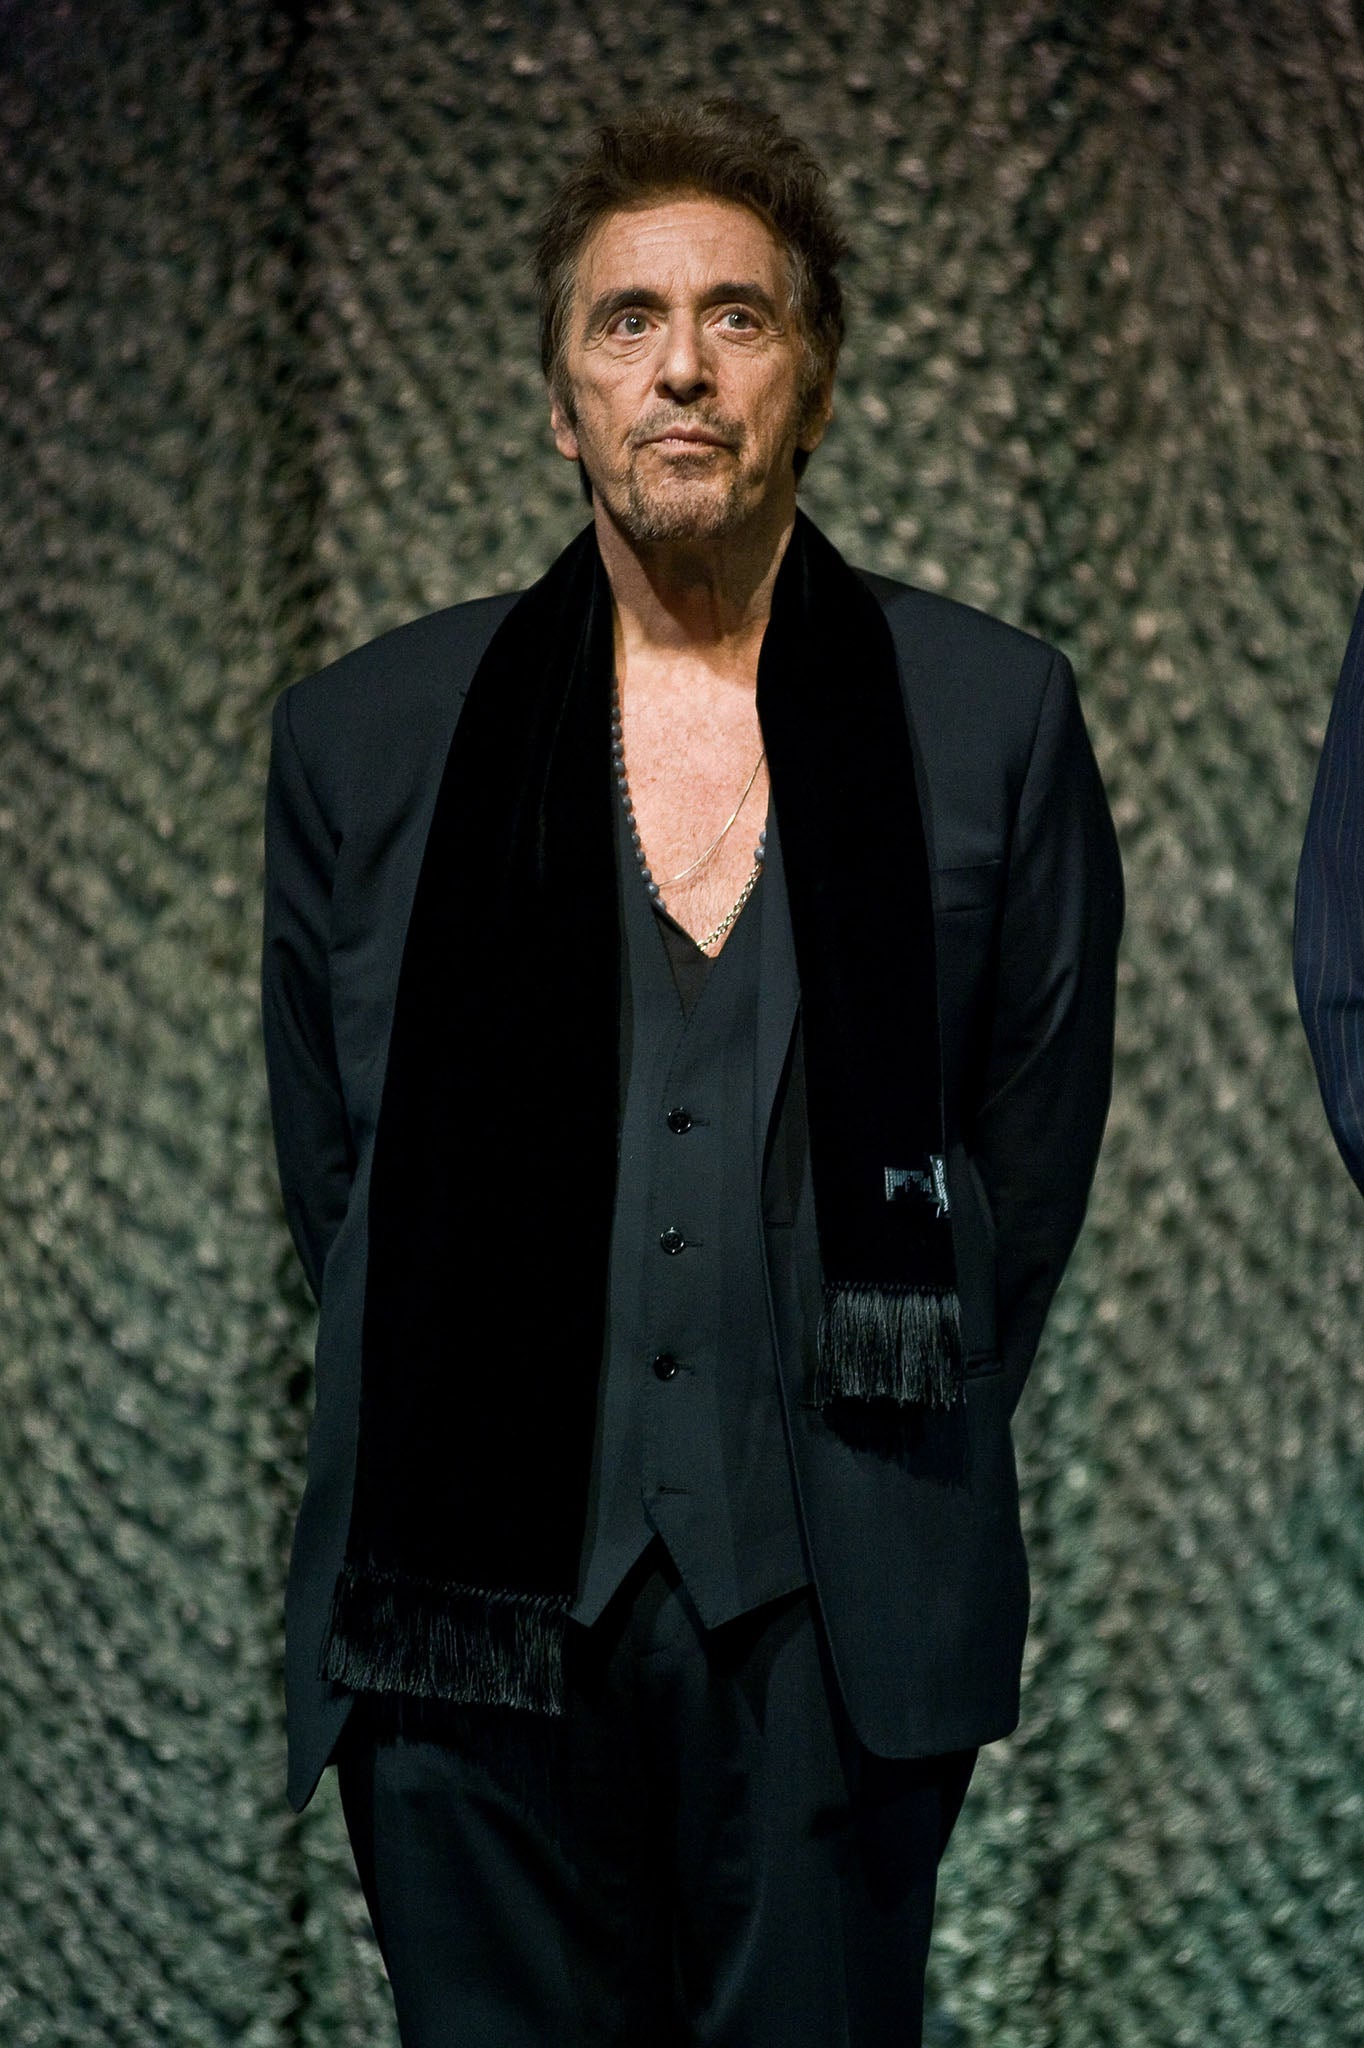 Al Pacino is to appear in a one-man show at the London Palladium